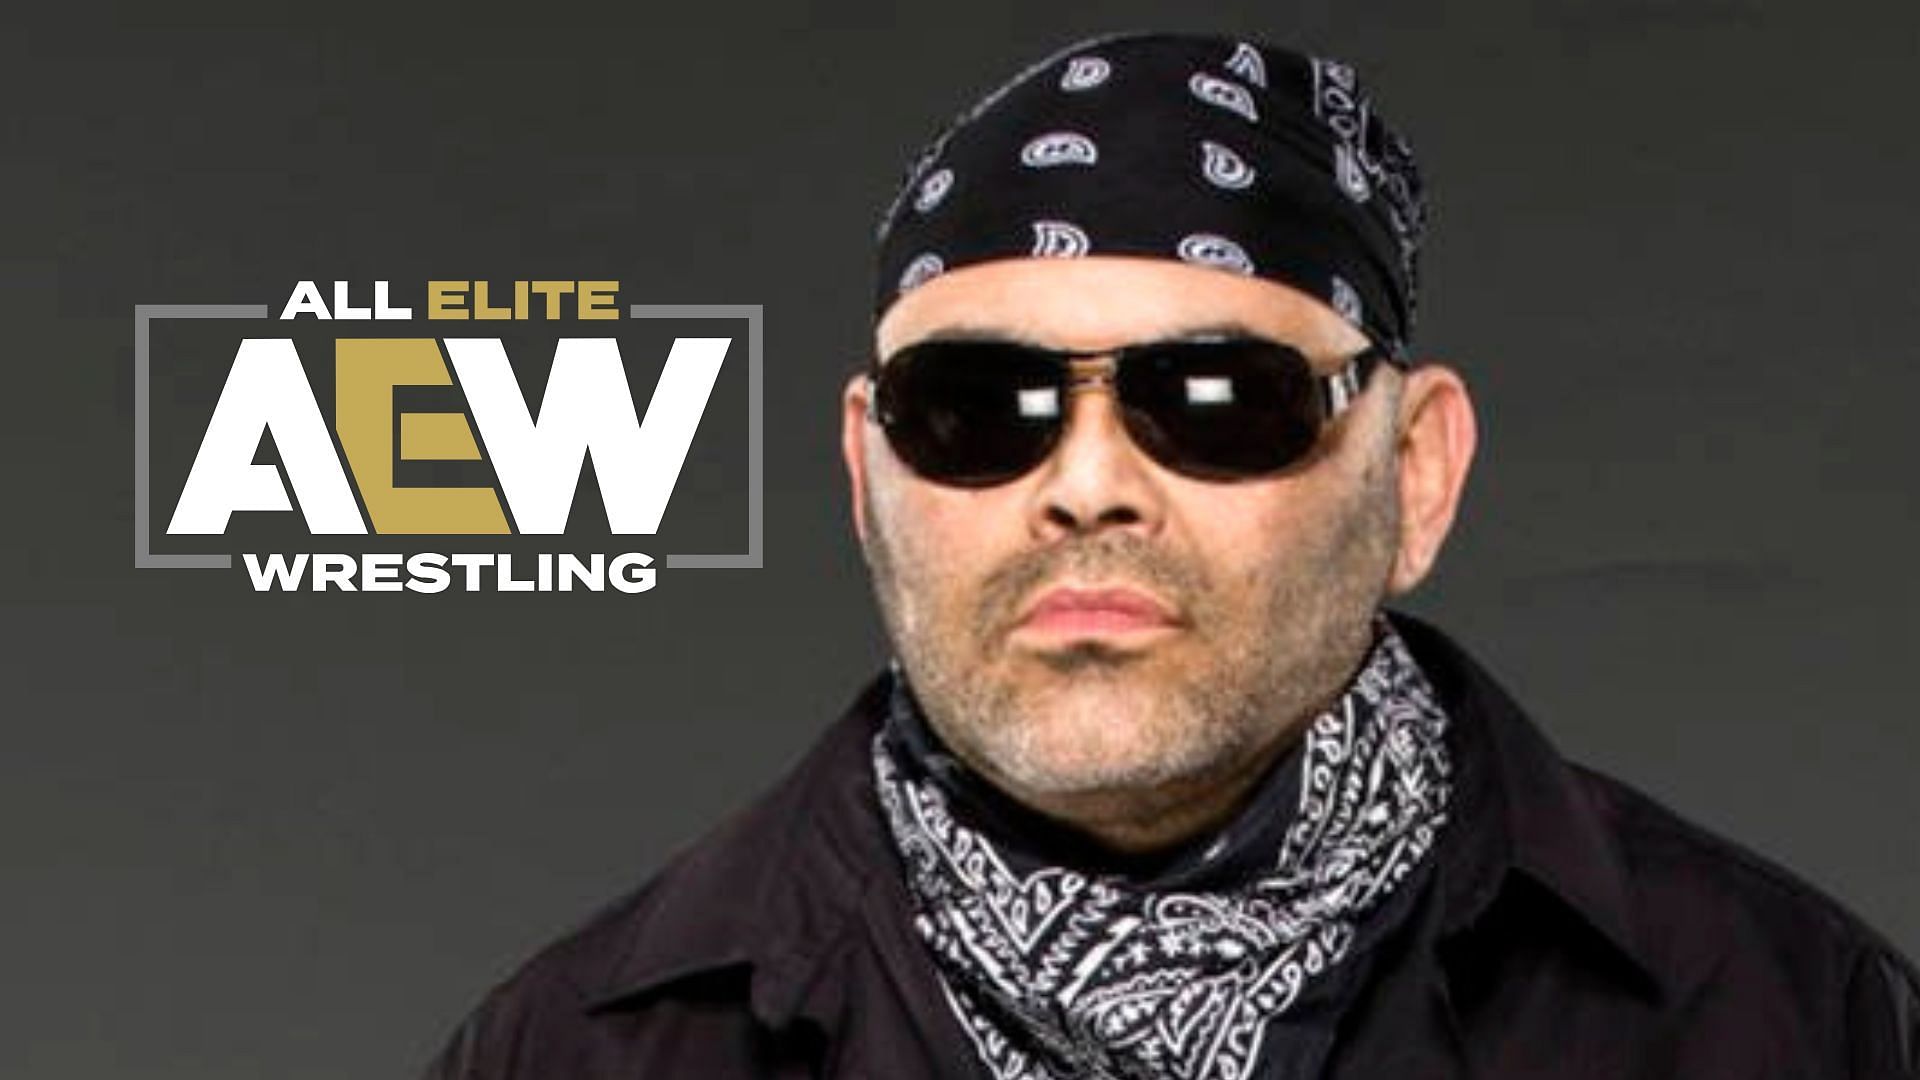 Konnan has some insight in to why an AEW tag team has broken up